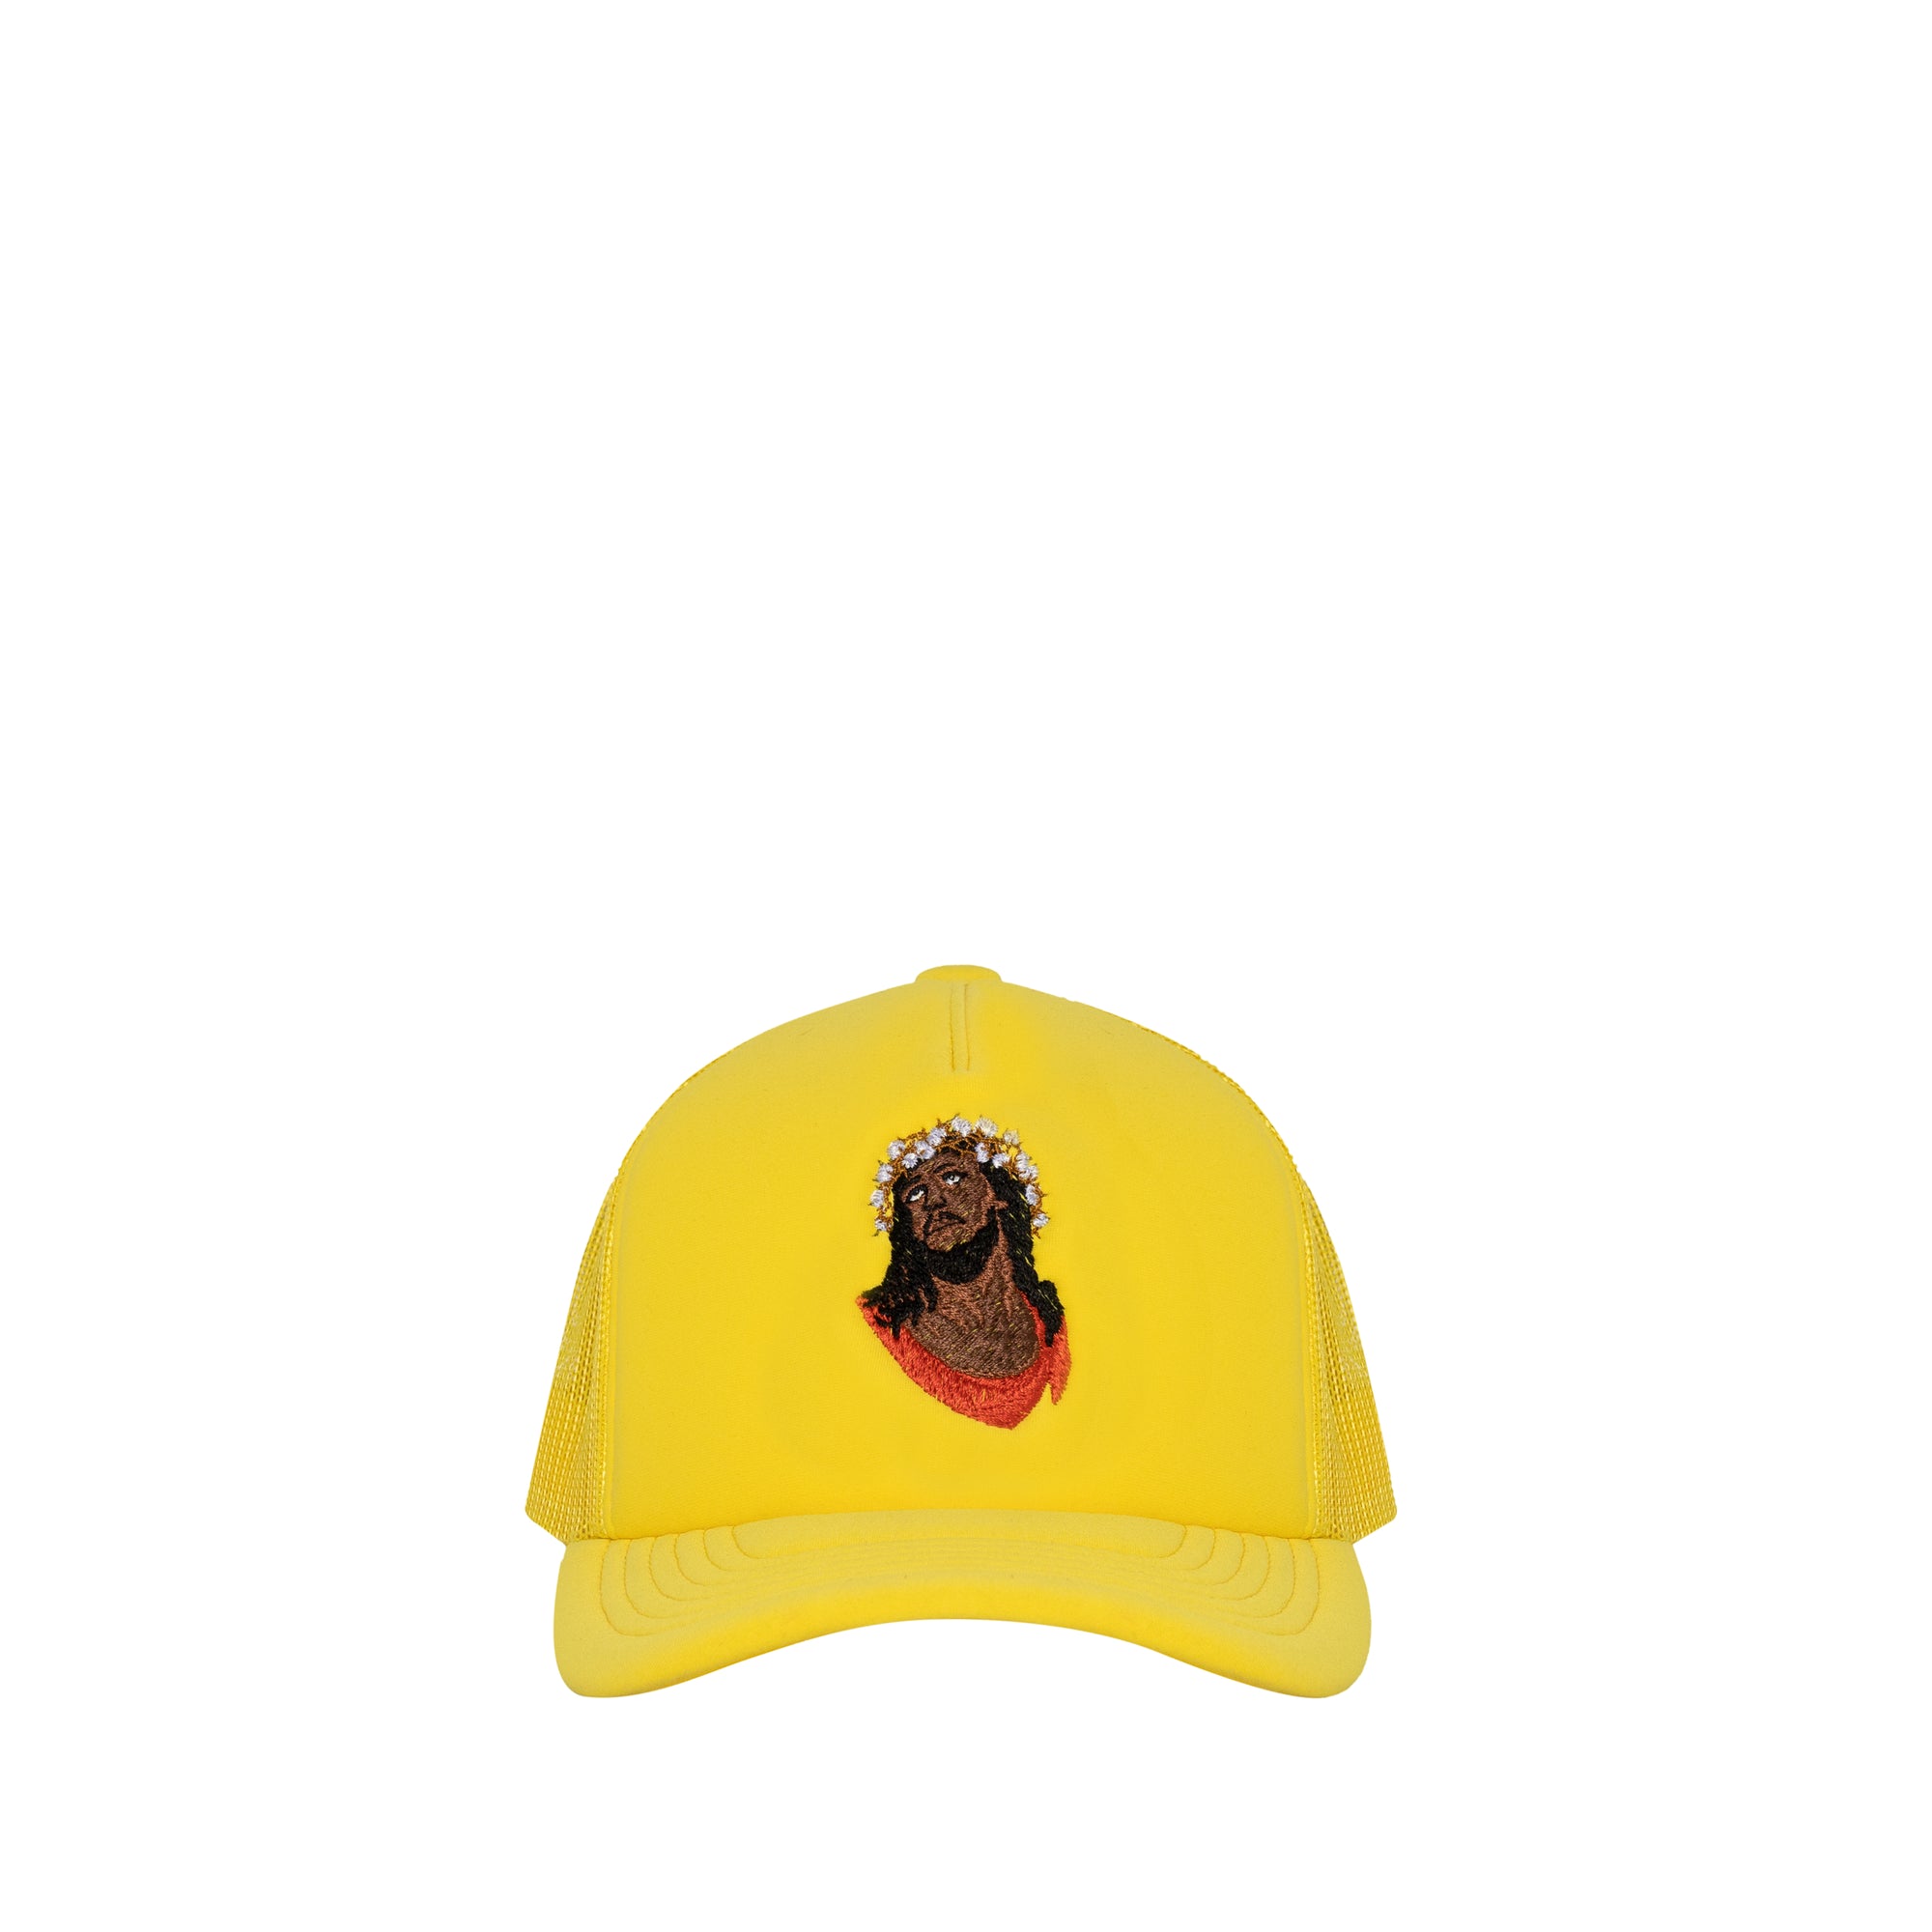 Denim Tears - Crown Made Of Cotton Trucker Hat - (Yellow) view 1